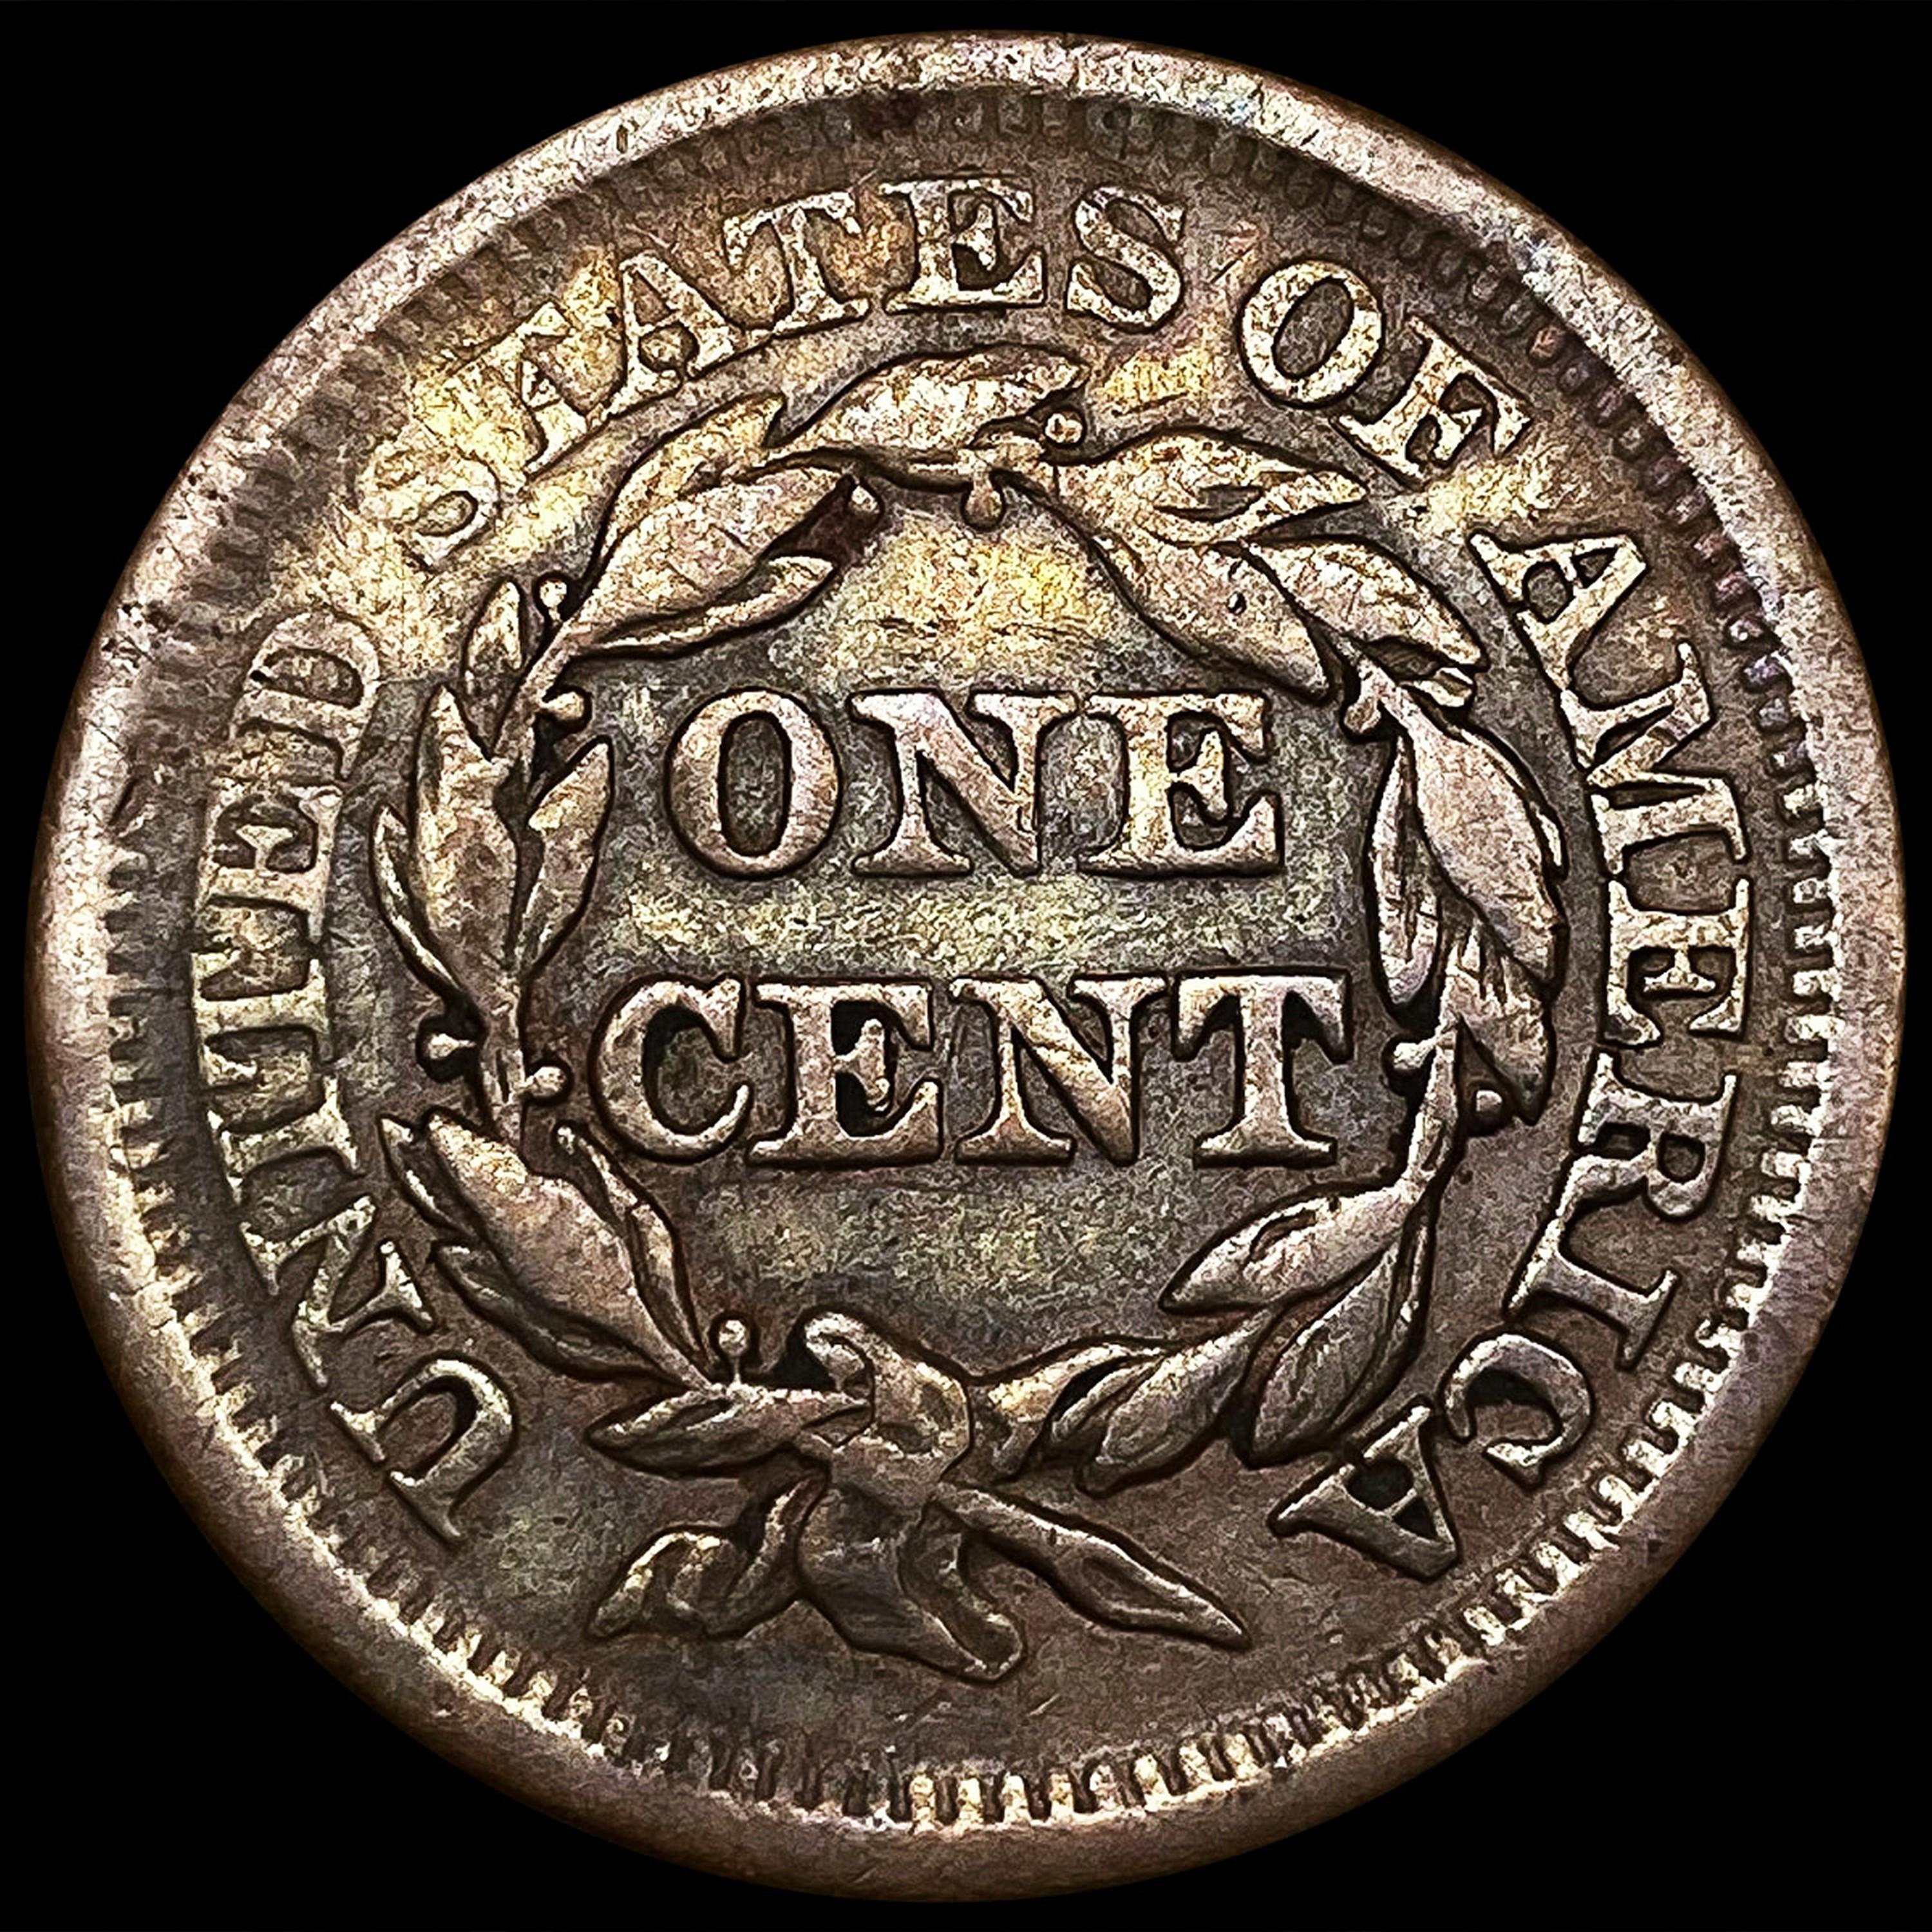 1857 Braided Hair Large Cent LIGHTLY CIRCULATED